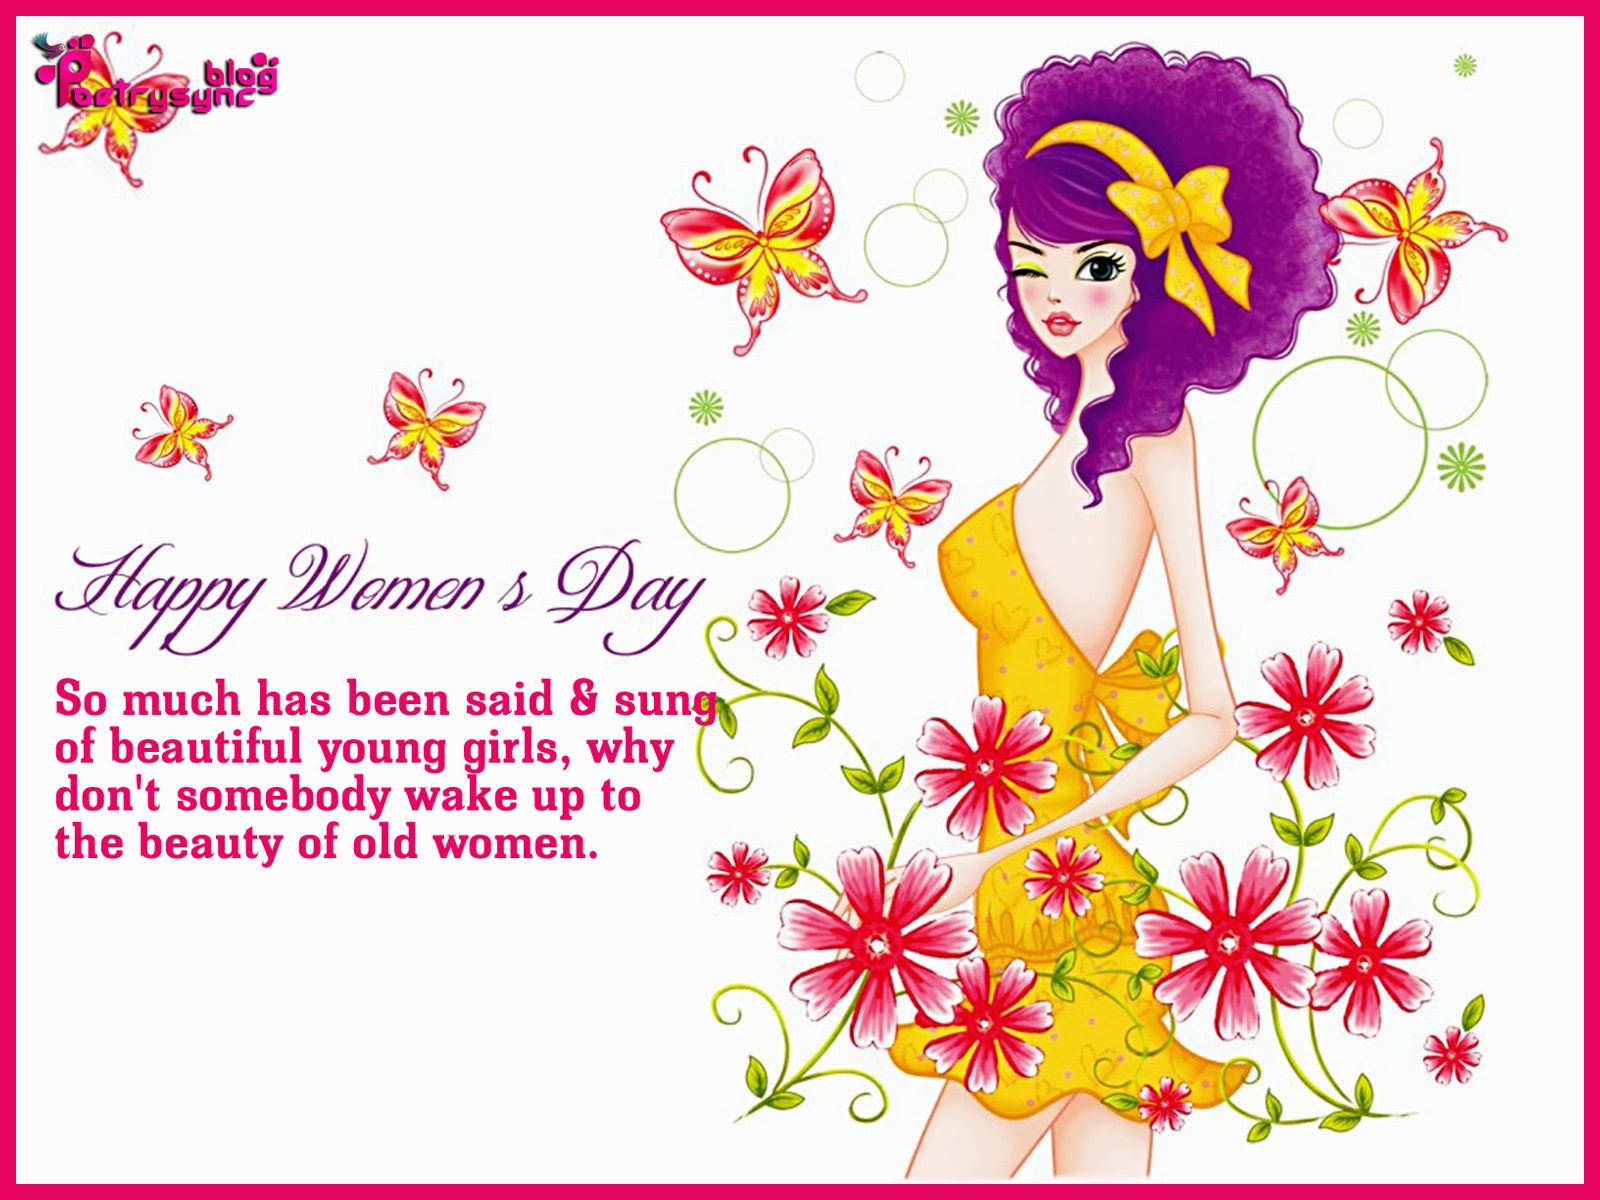 Women's Day Whatsapp Status & Messages for Facebook